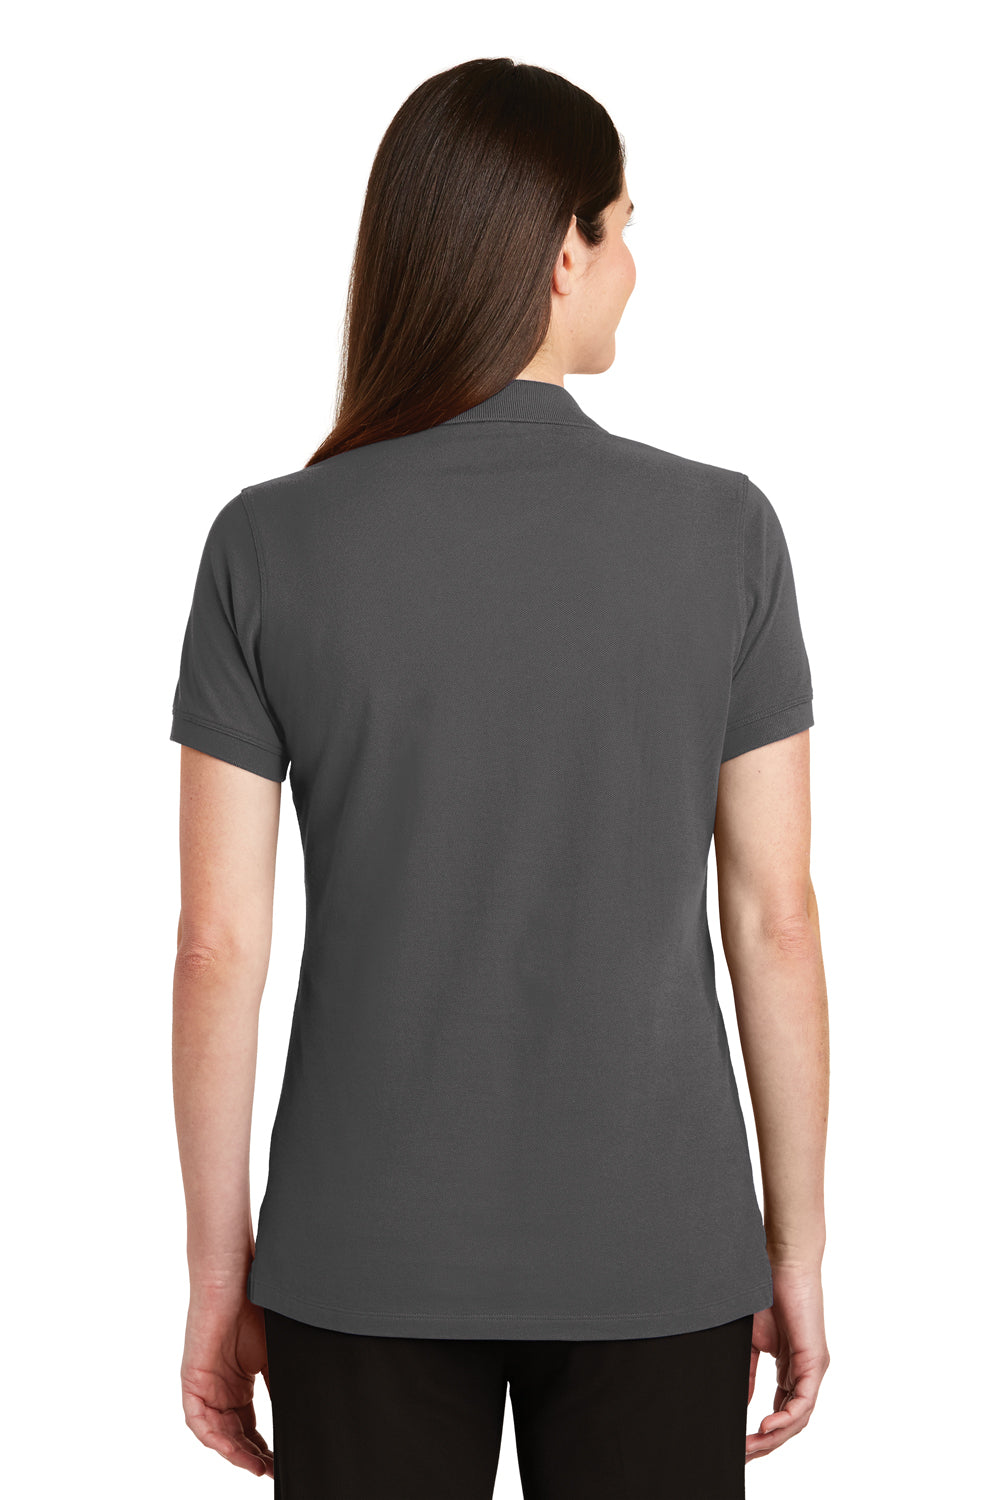 Port Authority LK8000 Womens Wrinkle Resistant Short Sleeve Polo Shirt Sterling Grey Back